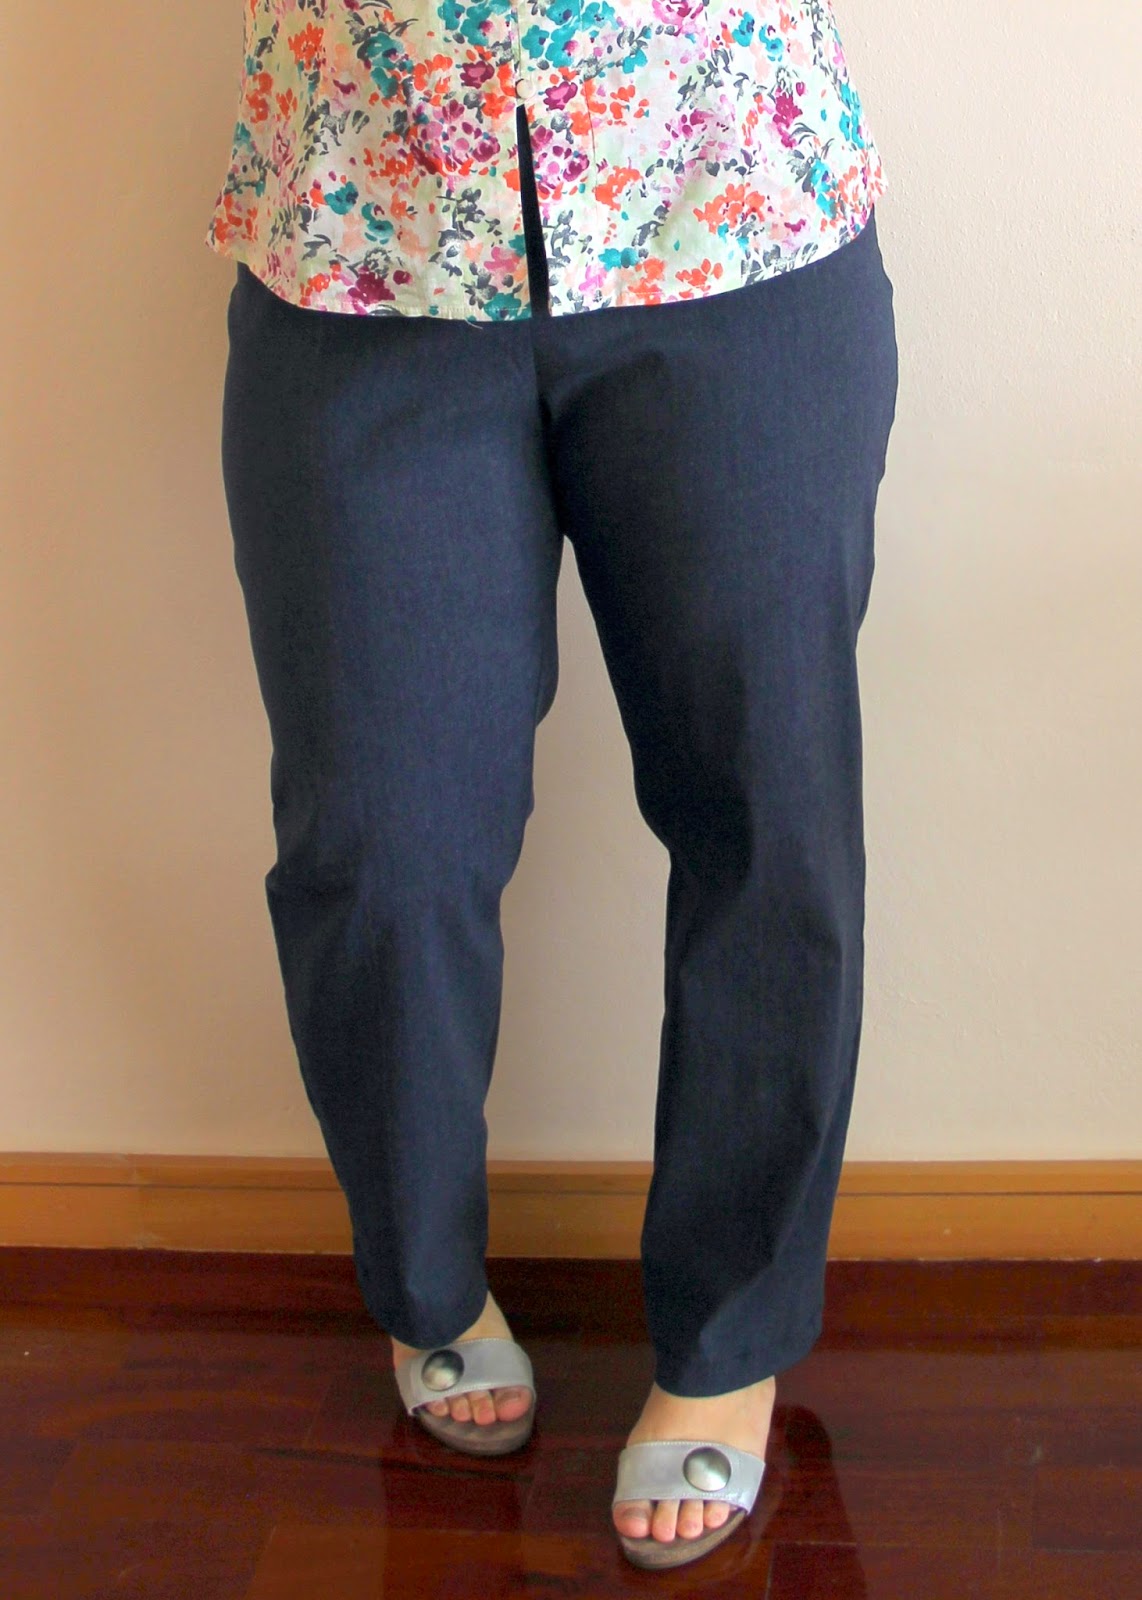 Cookin' & Craftin': Sewing Dare Part 1: Style Arc Barb